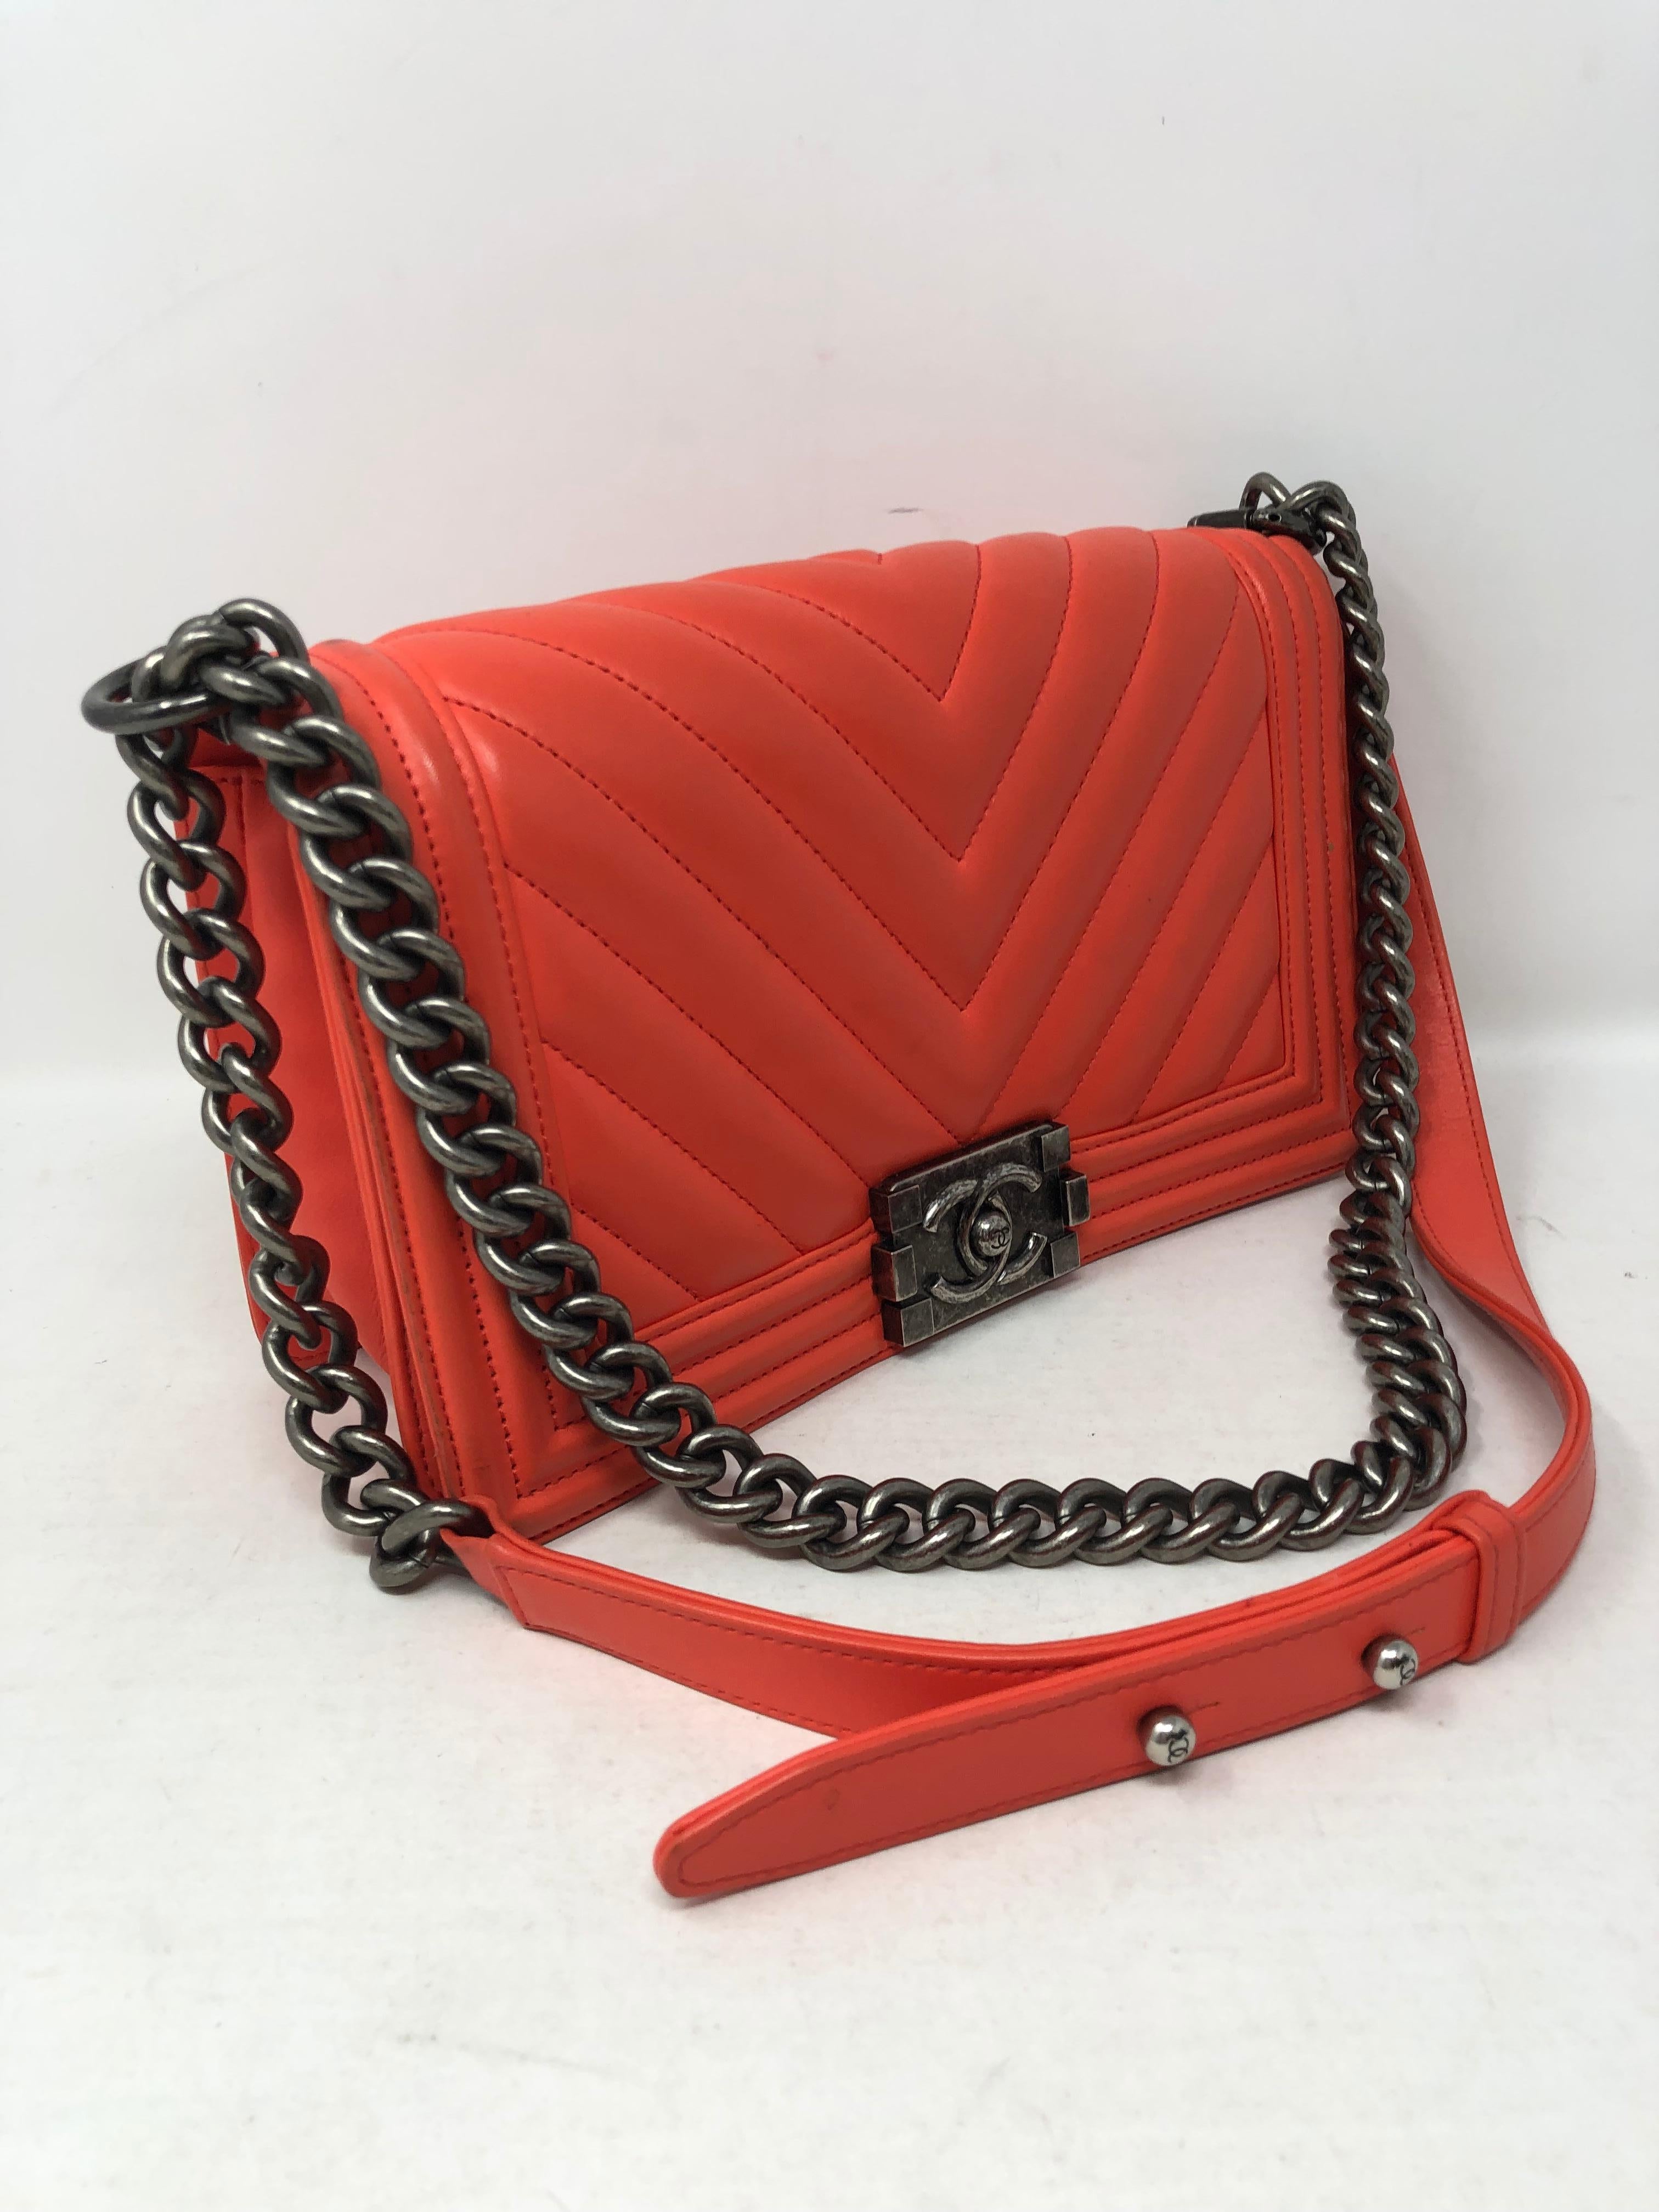 Chanel Coral Boy Bag Chevron pattern lambskin leather. Antique silver hardware. Medium size. Can be worn crossbody or doubled as a shoulder bag. Has some wear on the back. Overall fair to good condition. Includes authenticity card and dust cover.